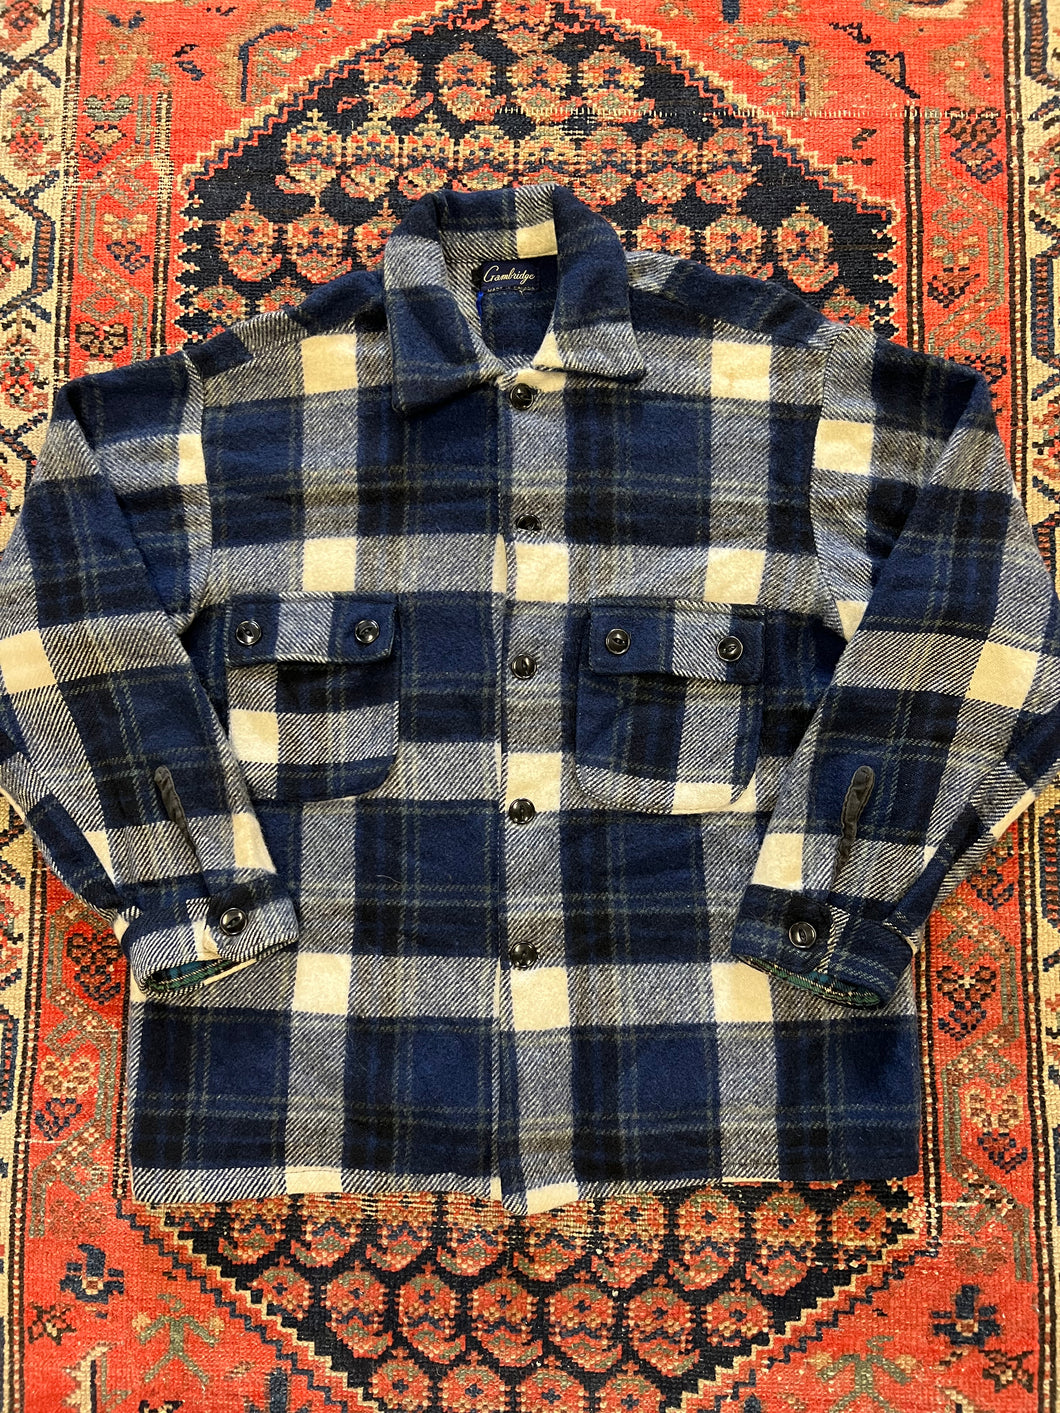 VINTAGE BUTTON UP SHIRT - SMALL